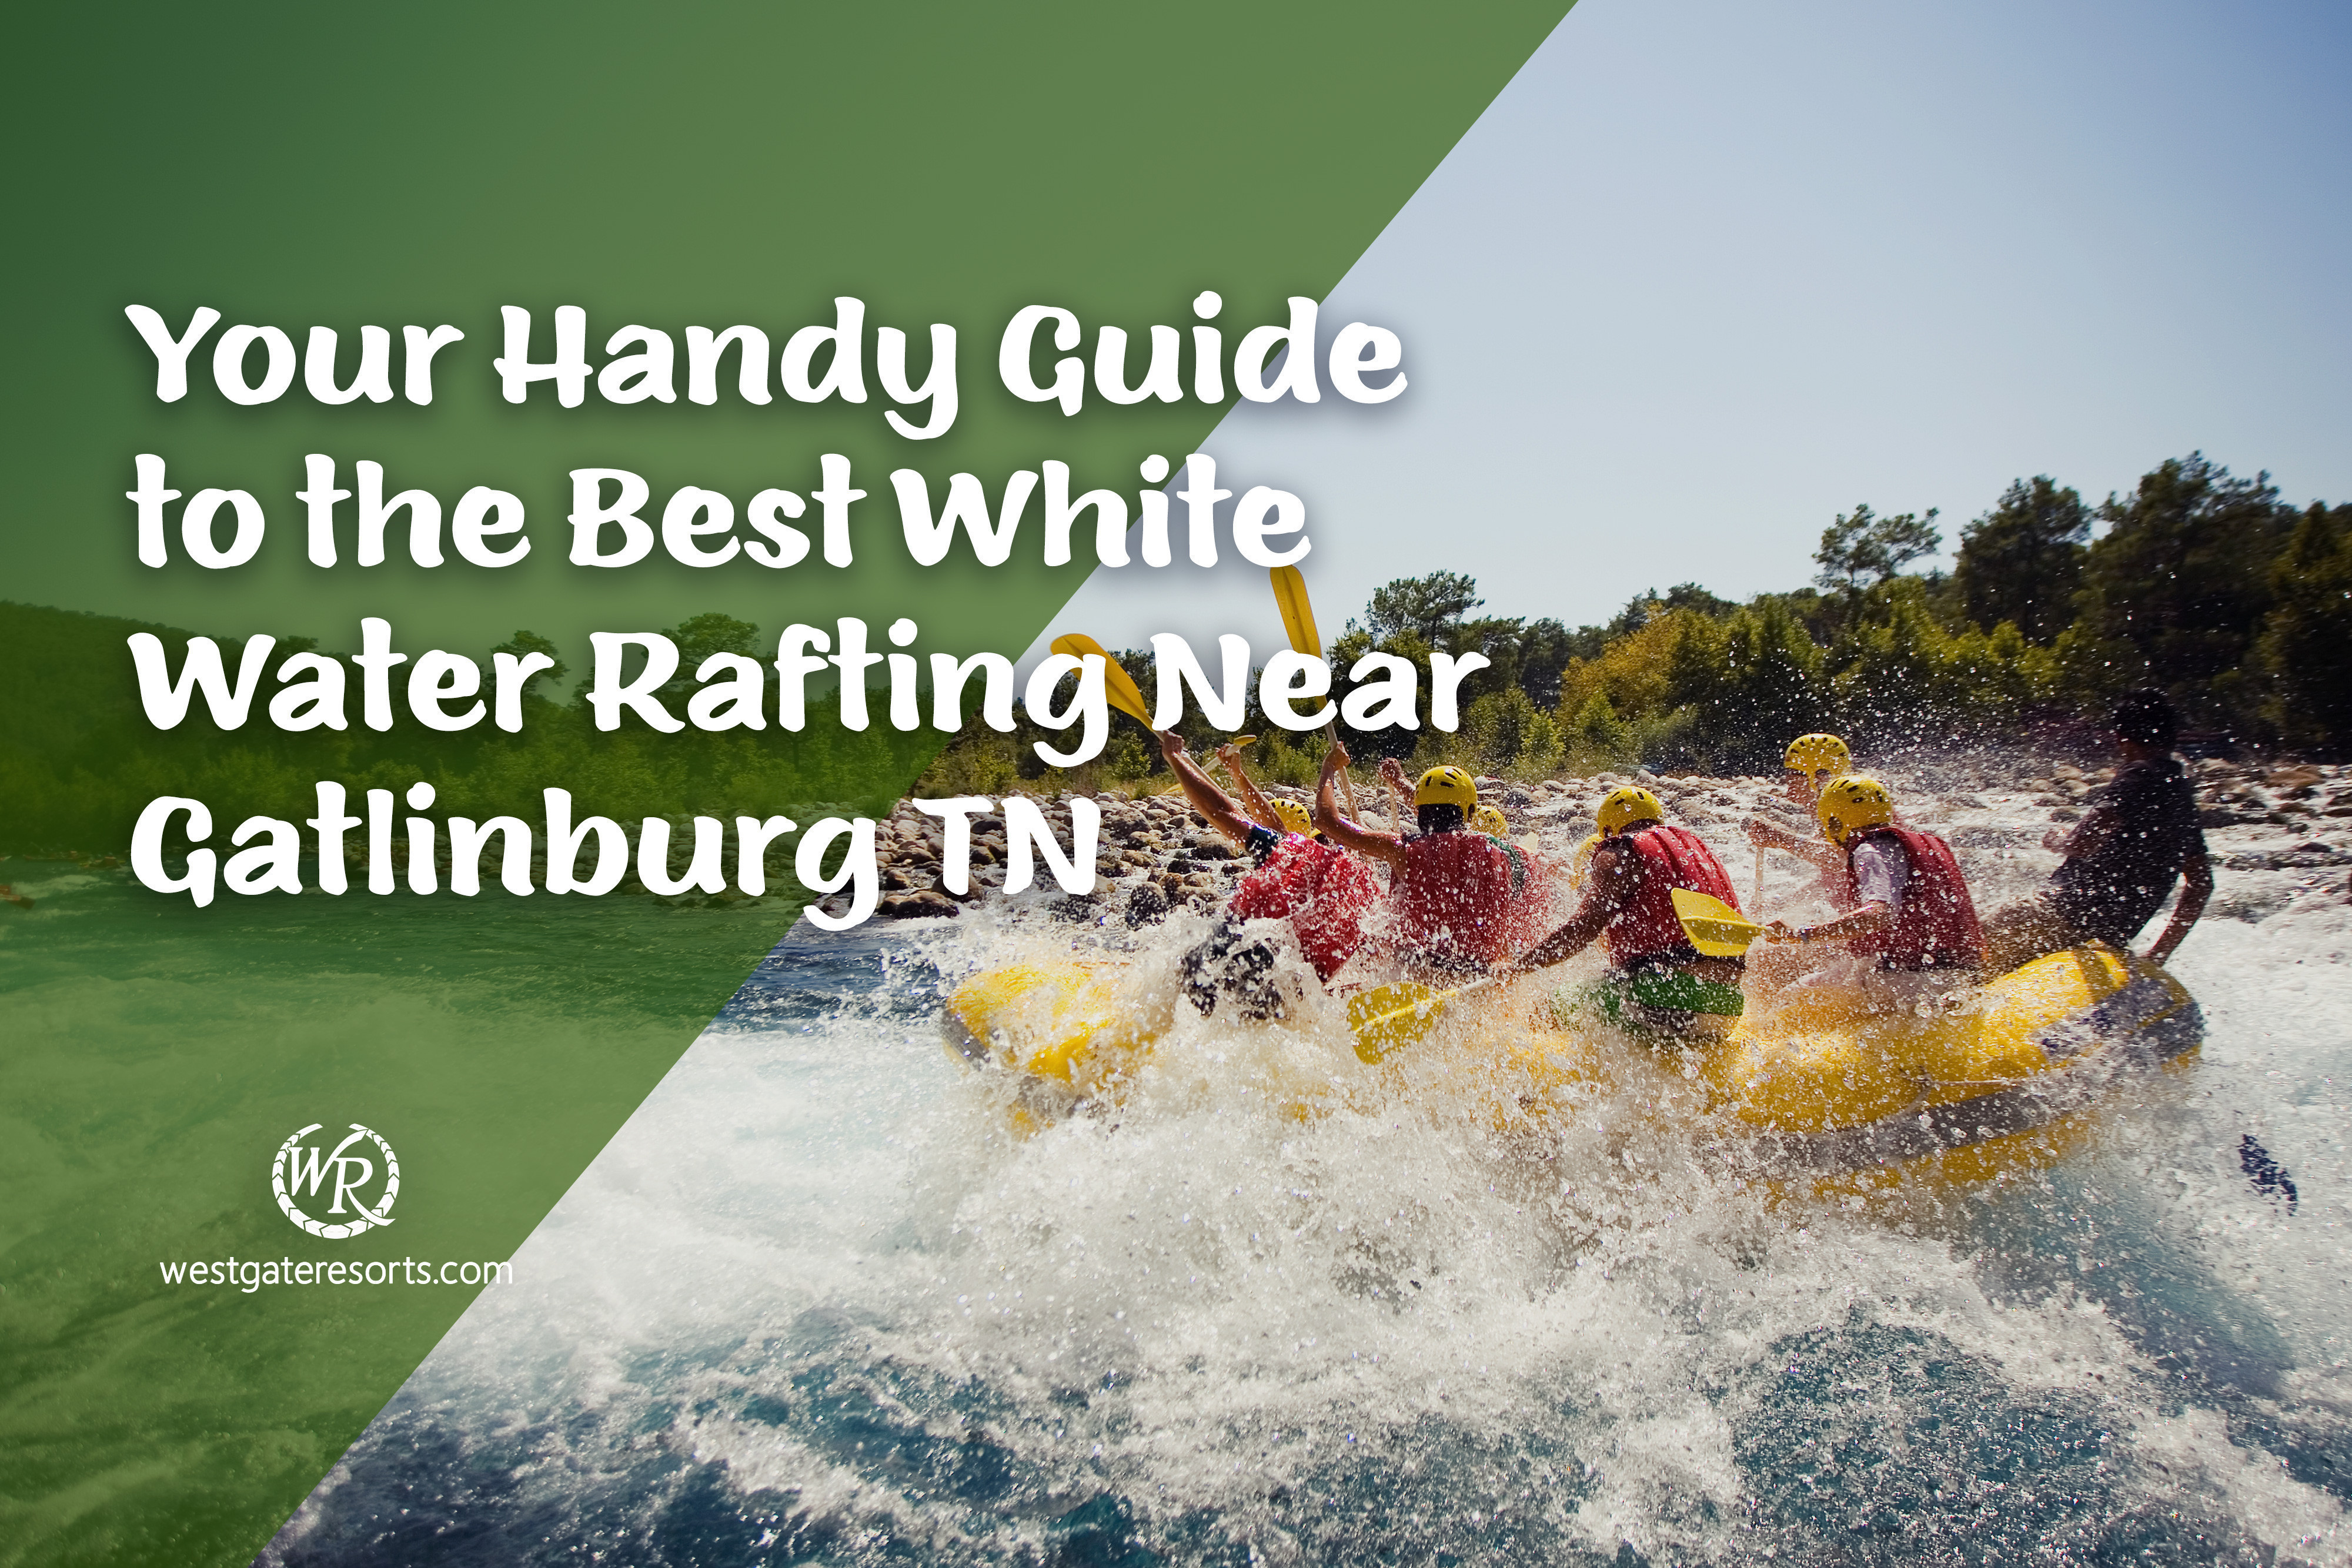 Your Handy Guide to the Best White Water Rafting Near Gatlinburg TN